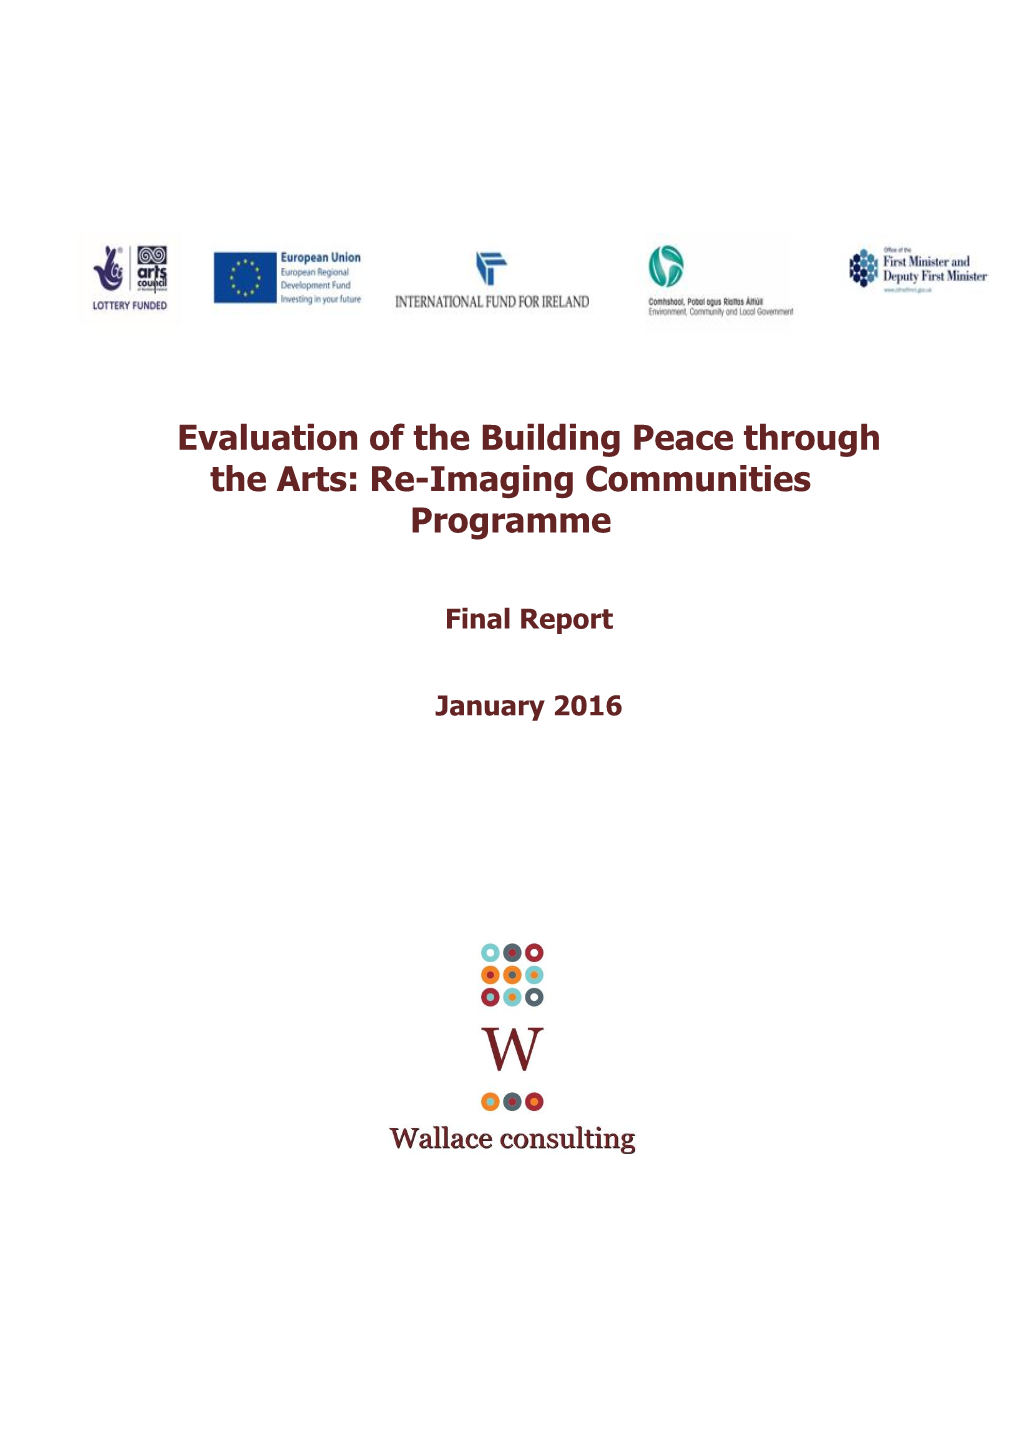 Evaluation of the Building Peace Through the Arts: Re-Imaging Communities Programme